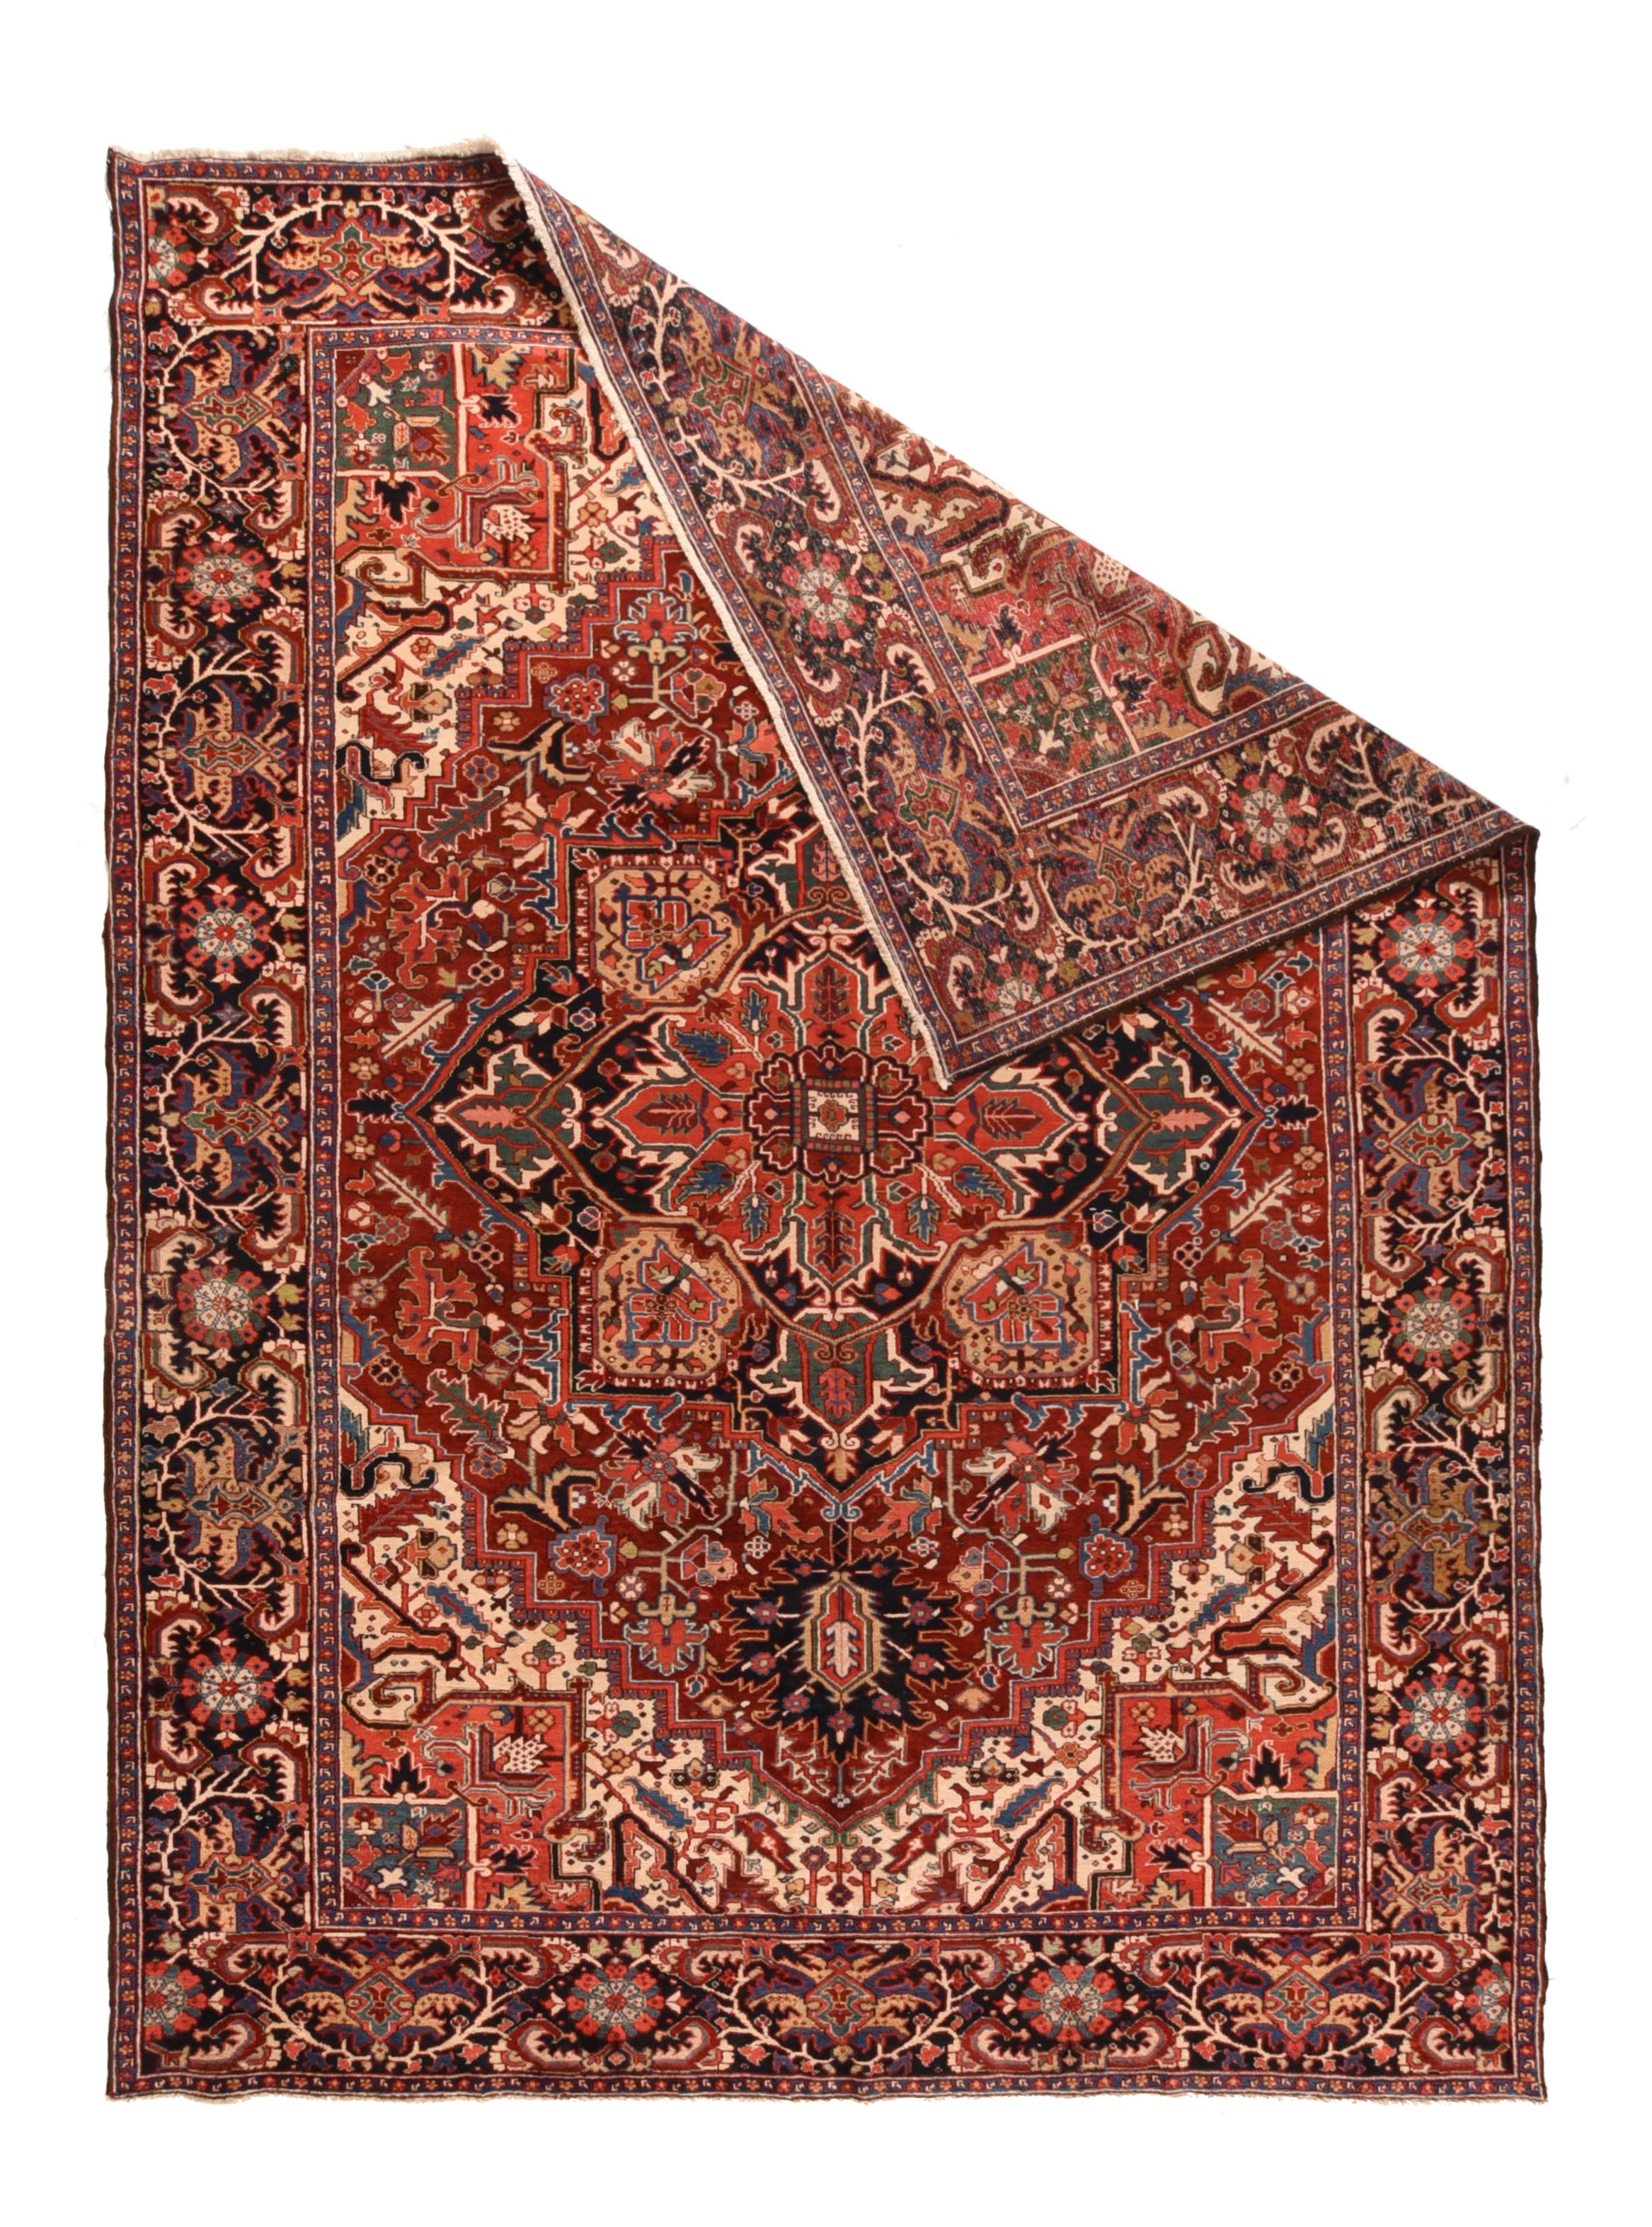 This is a totally classic NW Persian village carpet with a totally natural dye palette including: a madder red field with a navy indigo palmette octogramme medallion and ivory corners with salmon red “quarter medallion” inward projections.  Mustard,